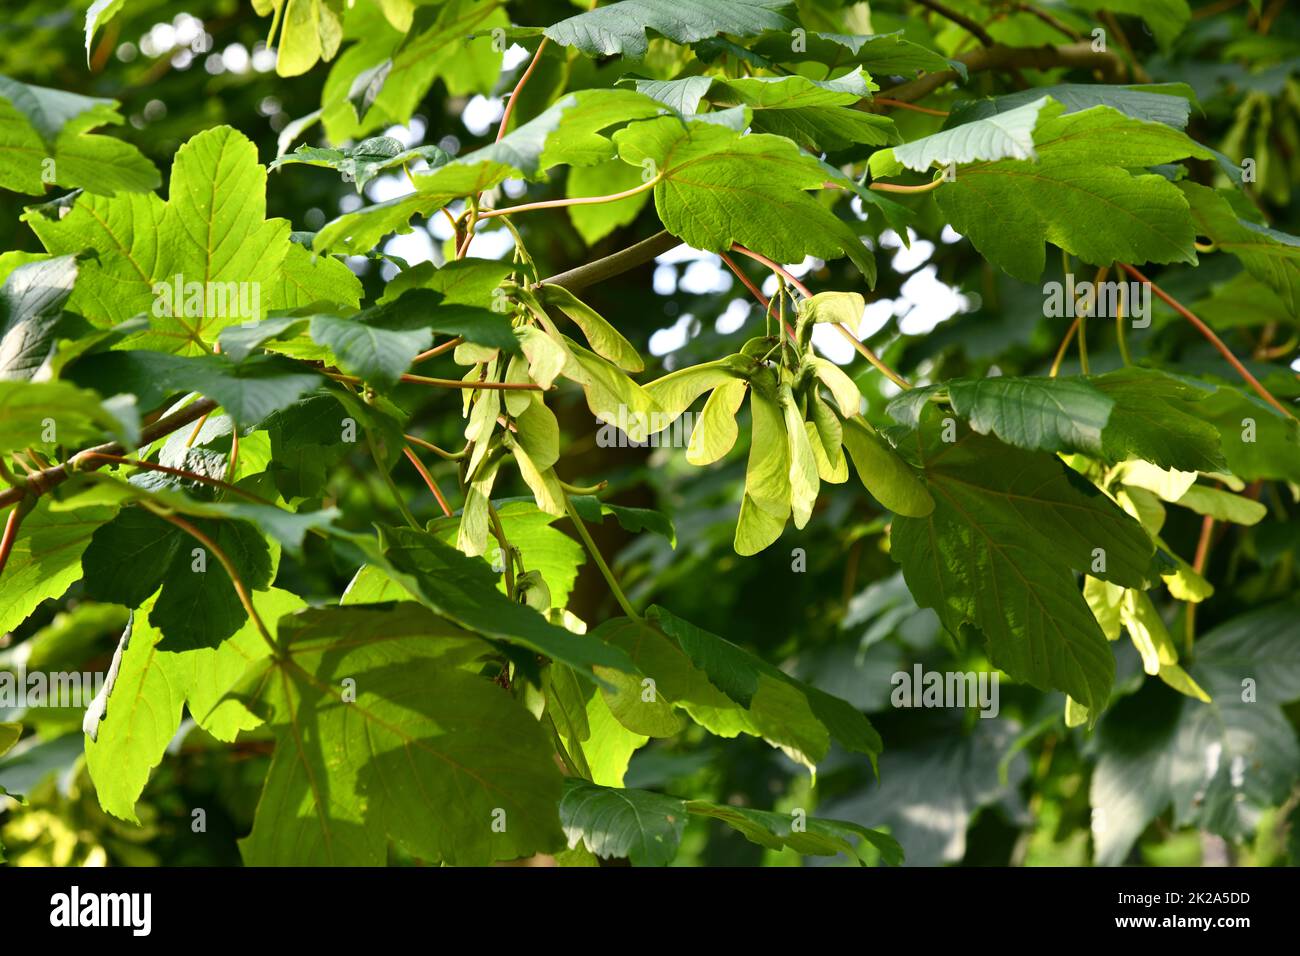 green maple tree with fruits Stock Photo